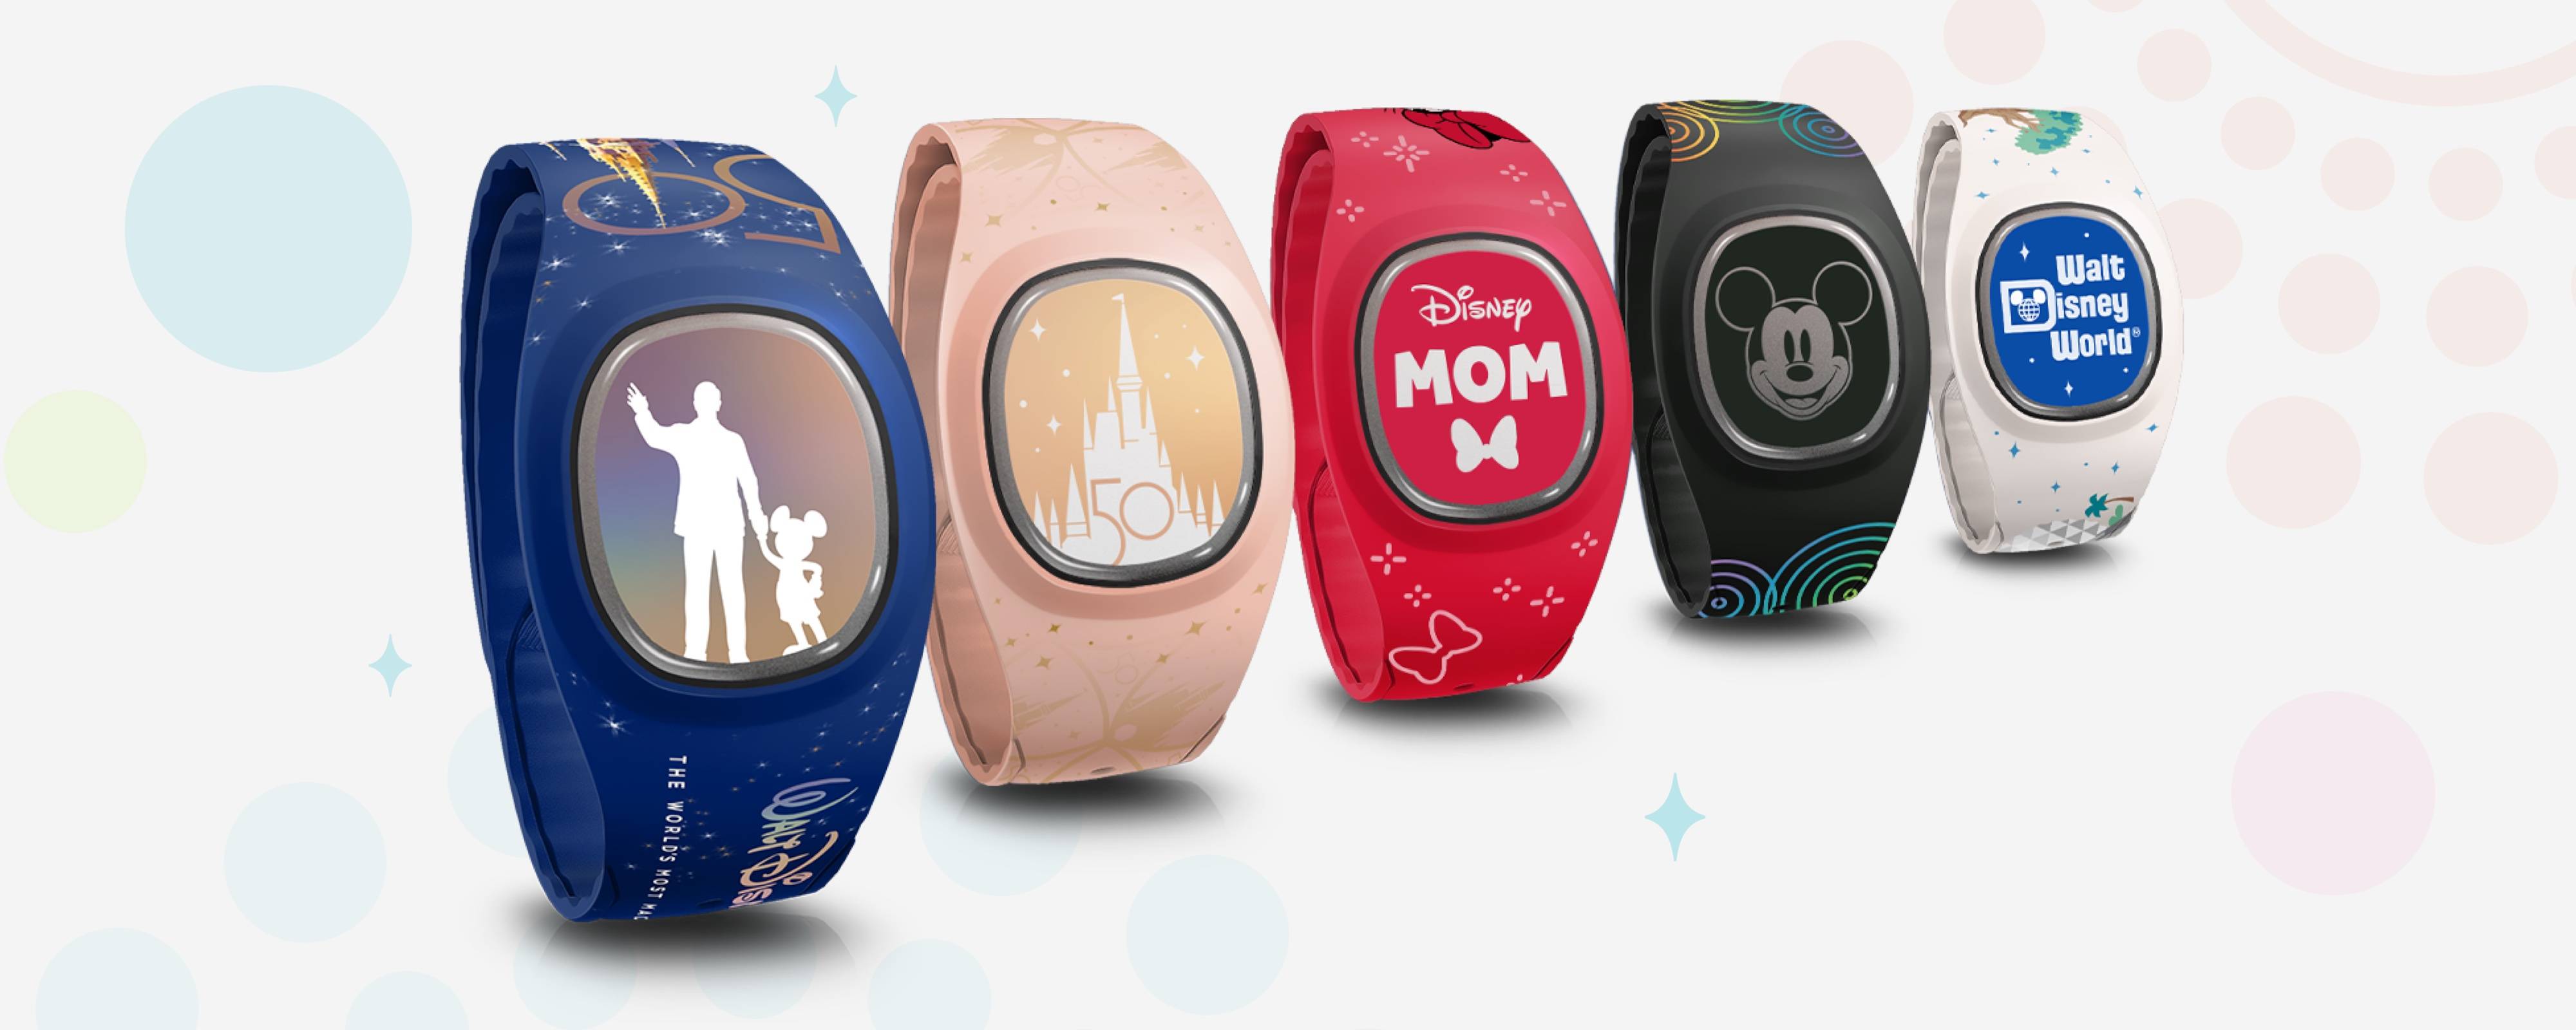 Disney Magic Bands: Everything You Need to Know! - A Few Shortcuts